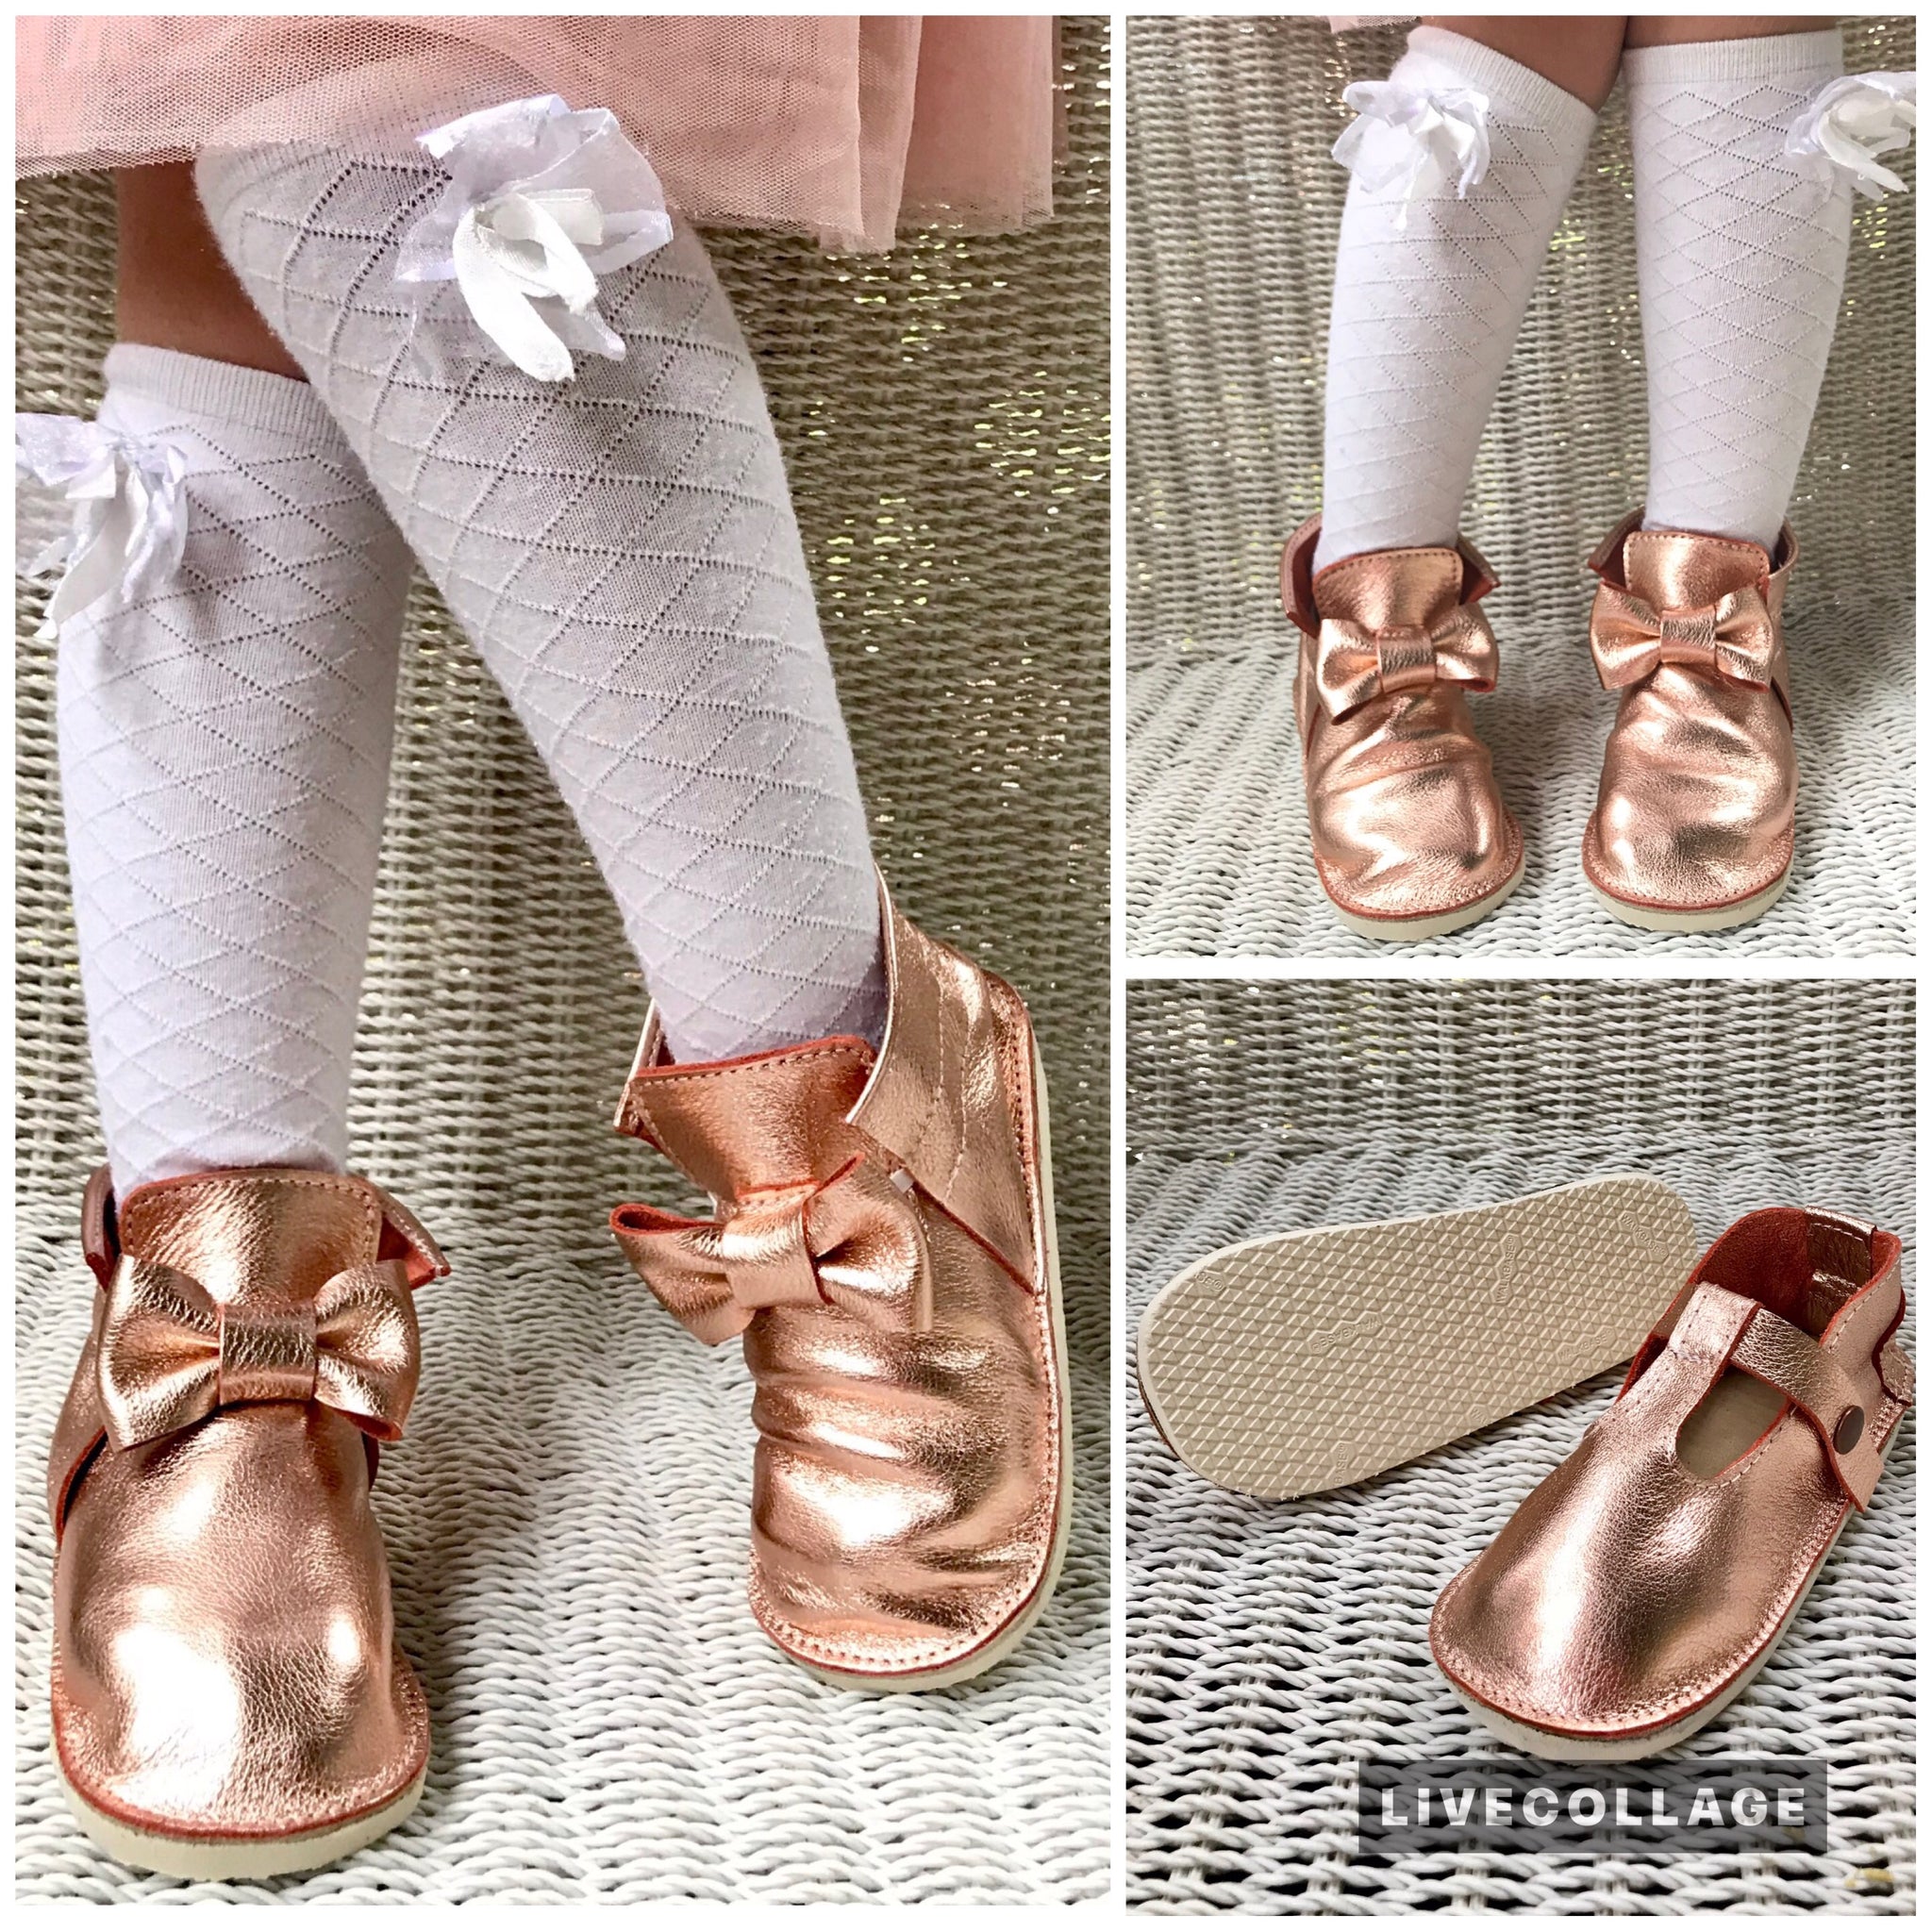 Metallic Rose gold kids leather shoes